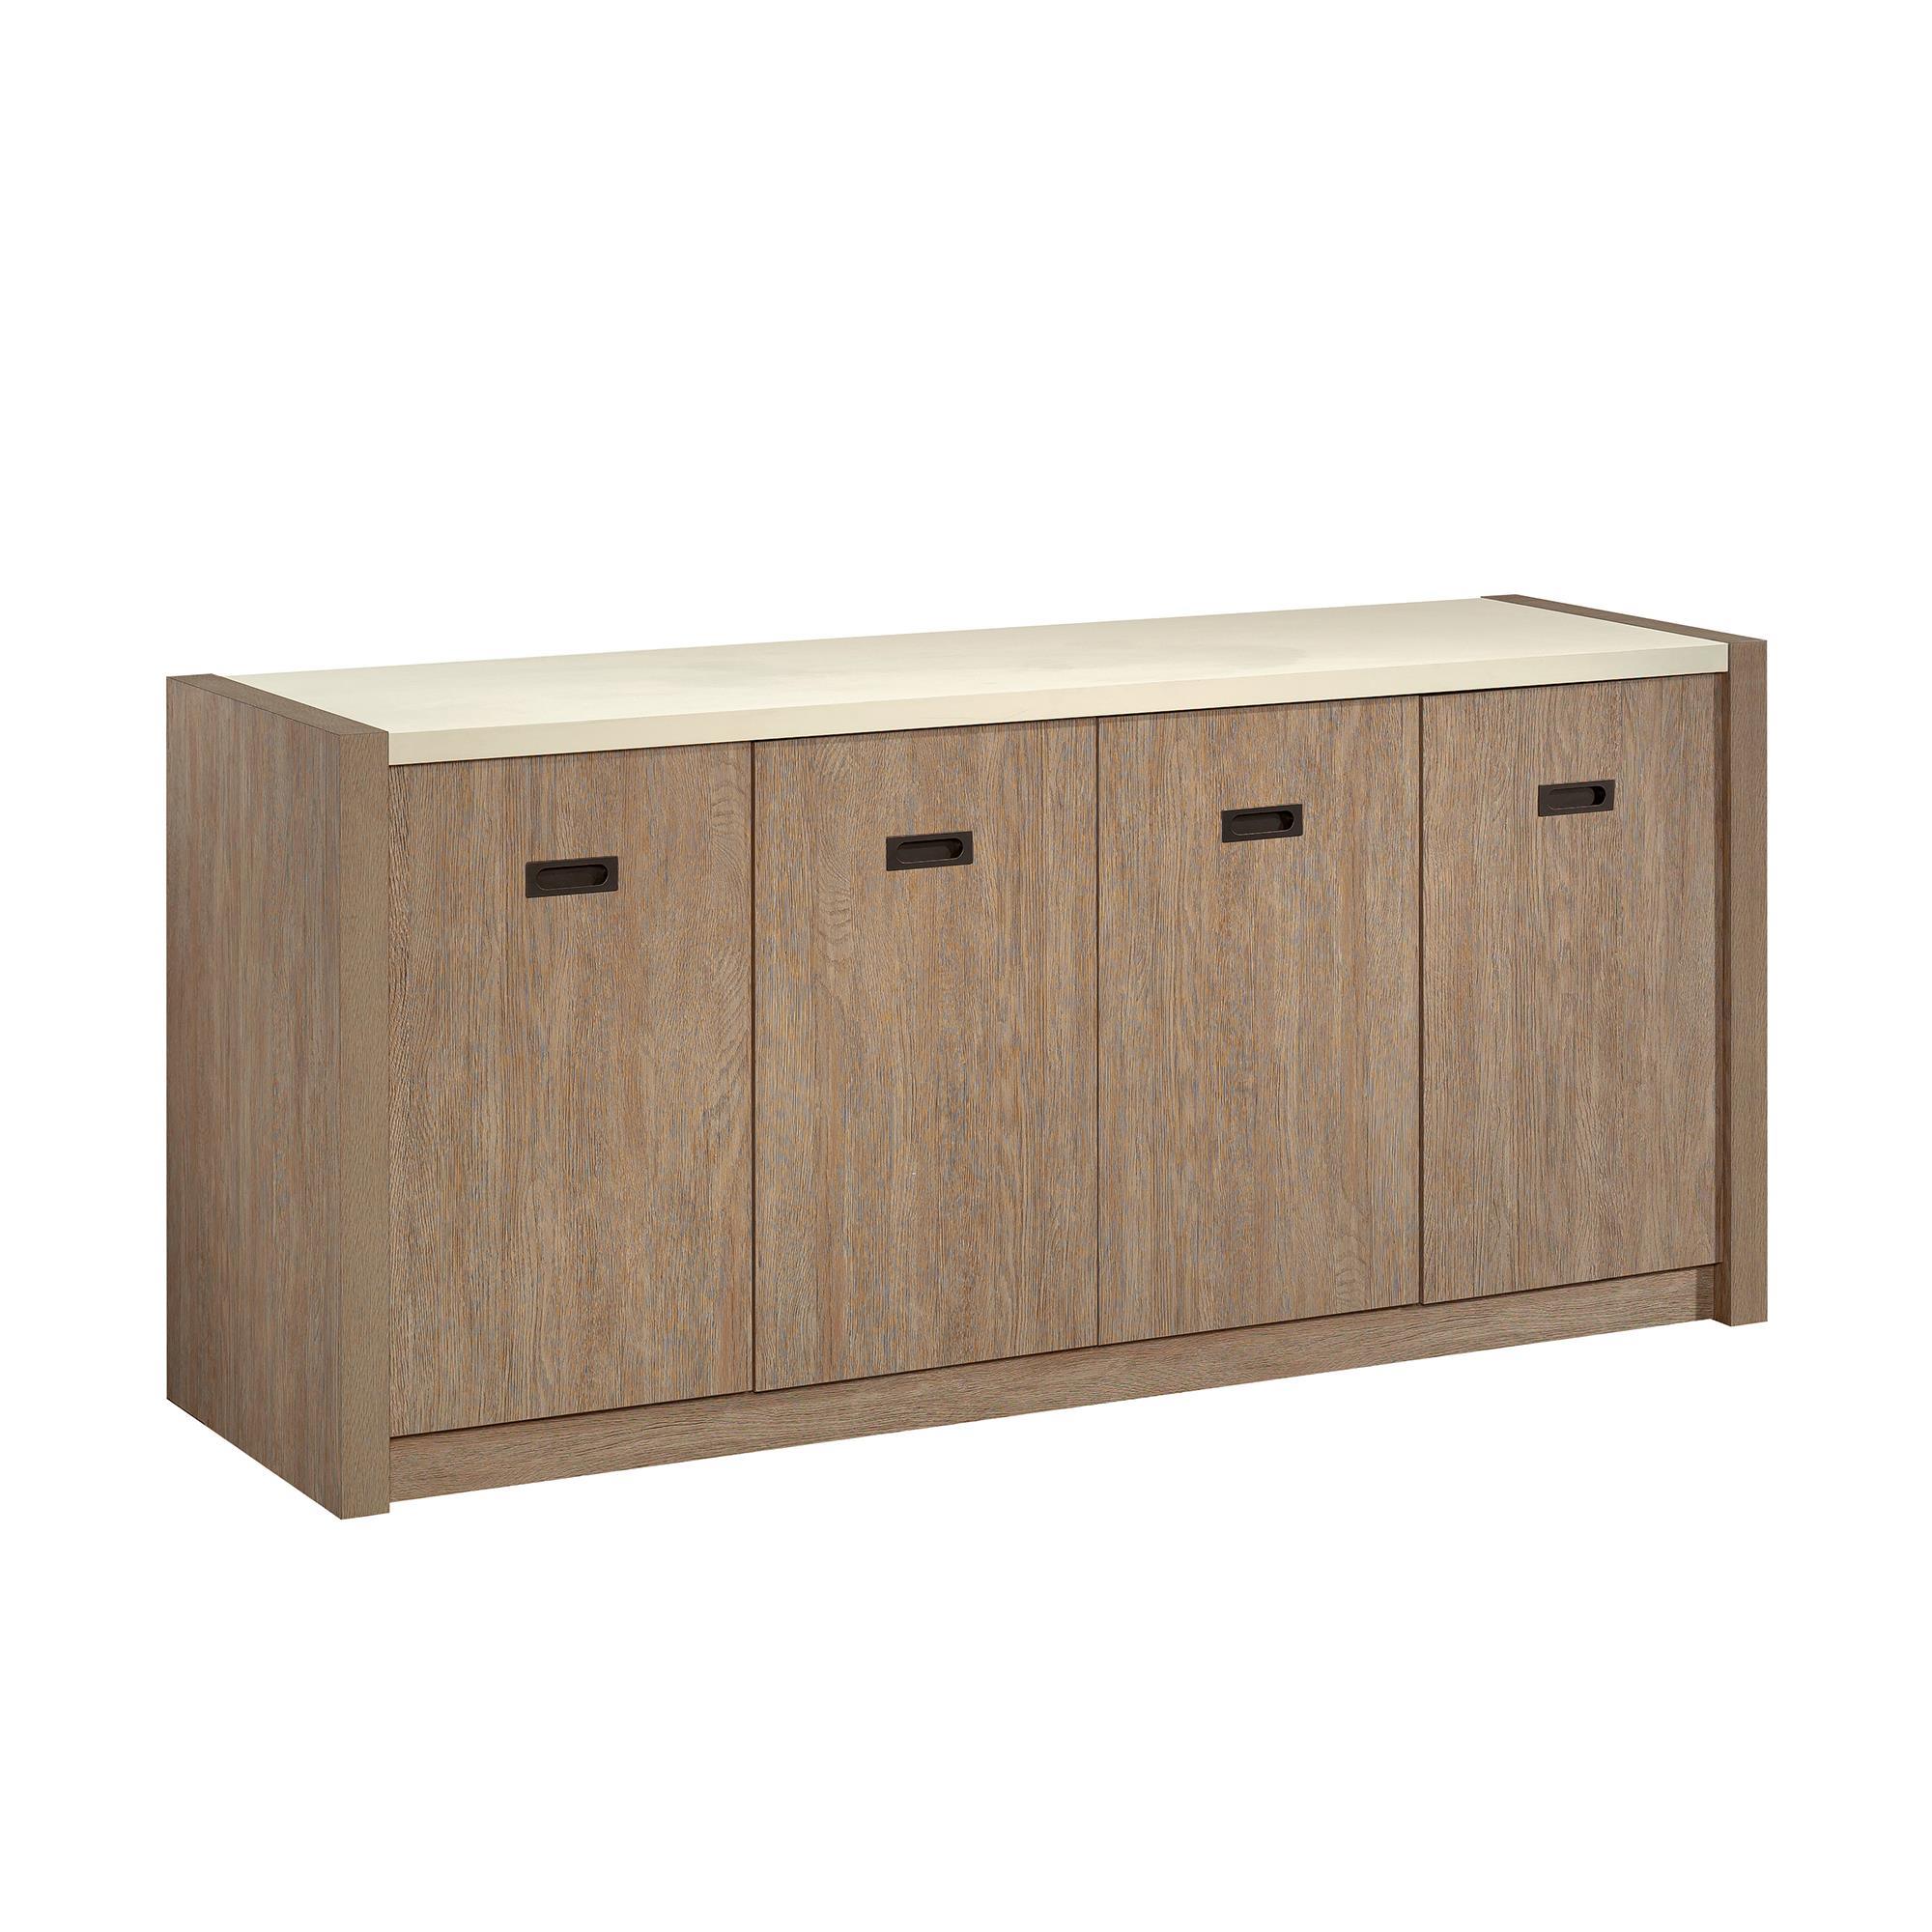 SAUDER Dixon City 2-Drawer Brushed Oak 29 in. H x 32 in. W x 20 in. D  Engineered Wood Lateral File Cabinet 431453 - The Home Depot